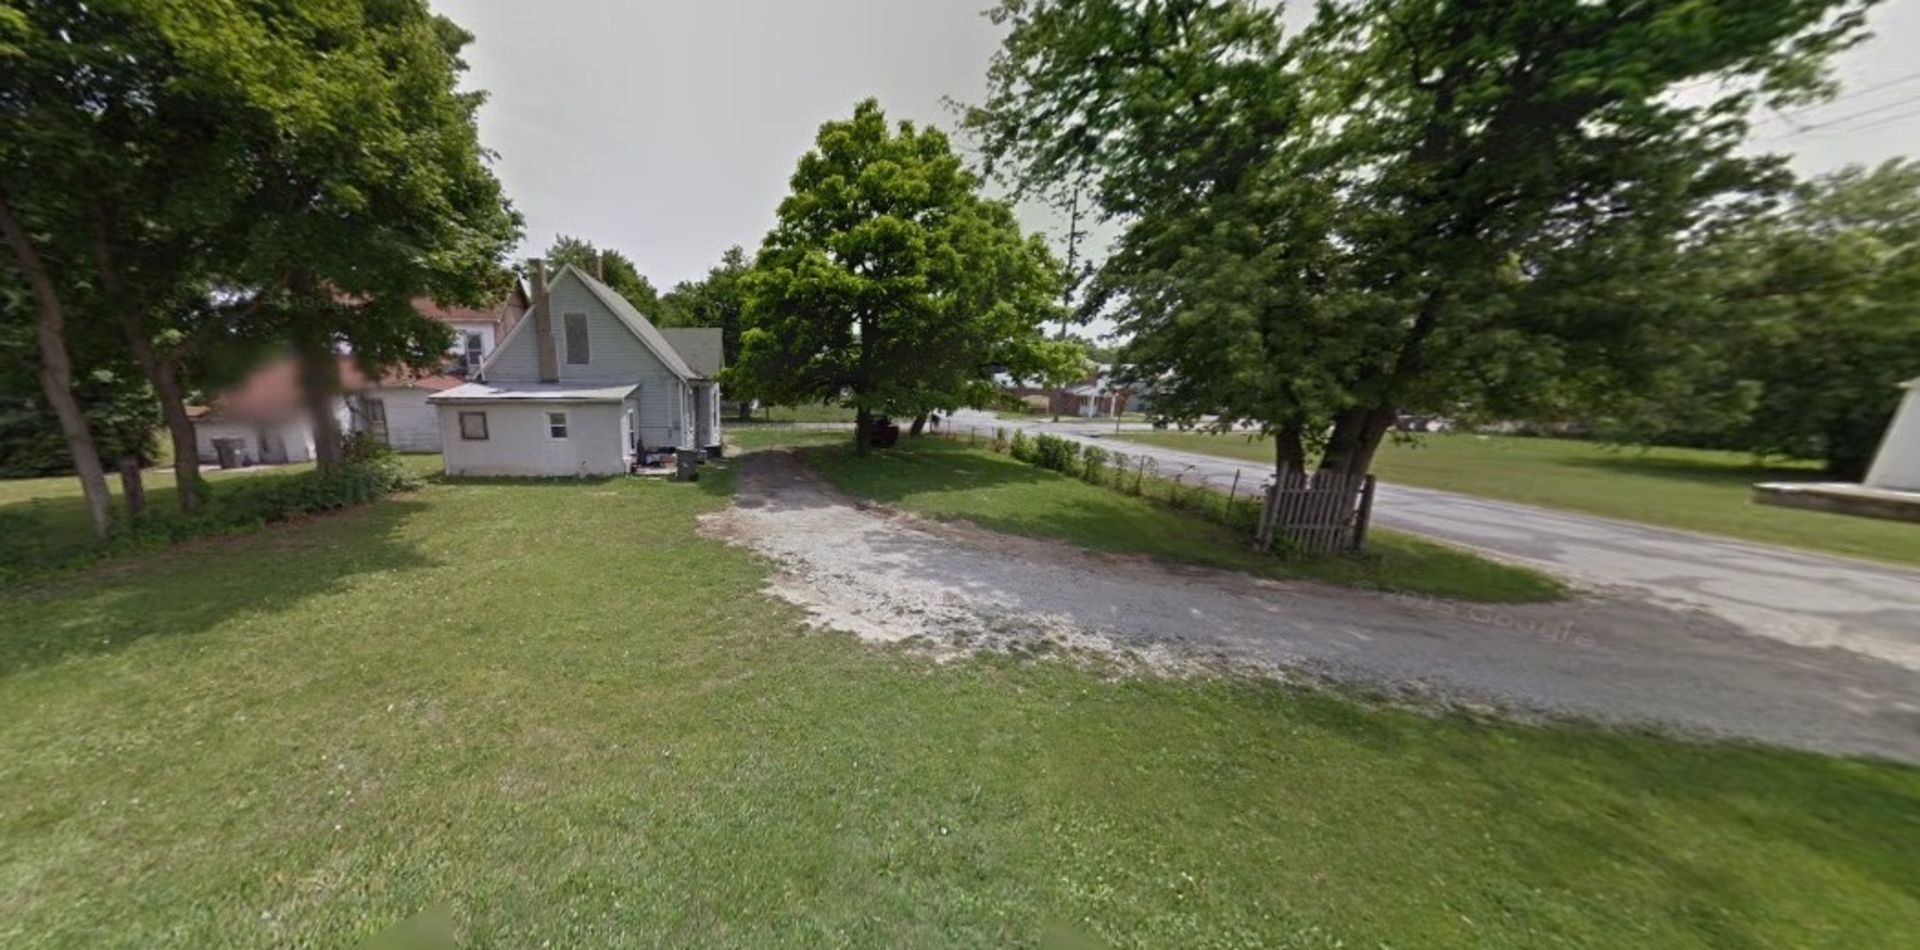 2202 SHELDON ST, INDIANAPOLIS, INDIANA 46218   NICE RESIDENTIAL PLOT OF LAND WITH MATURE TREES! GOOD - Image 5 of 12